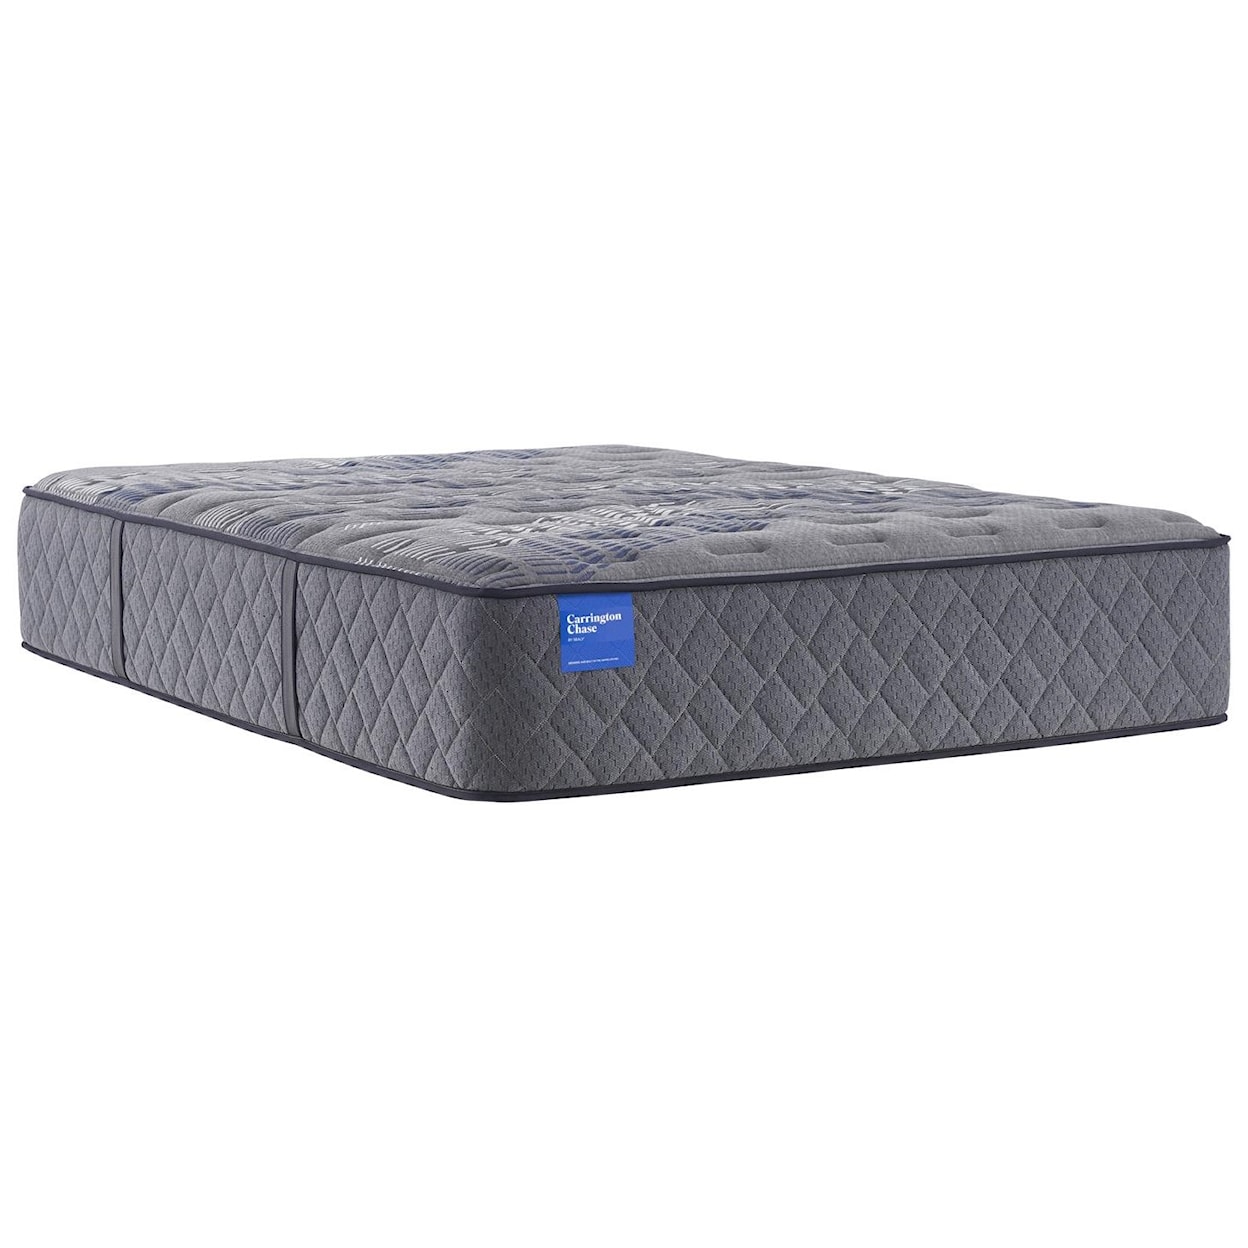 Sealy Sealy Posturepedic Launceton Firm Full Sealy 15" Firm Mattress